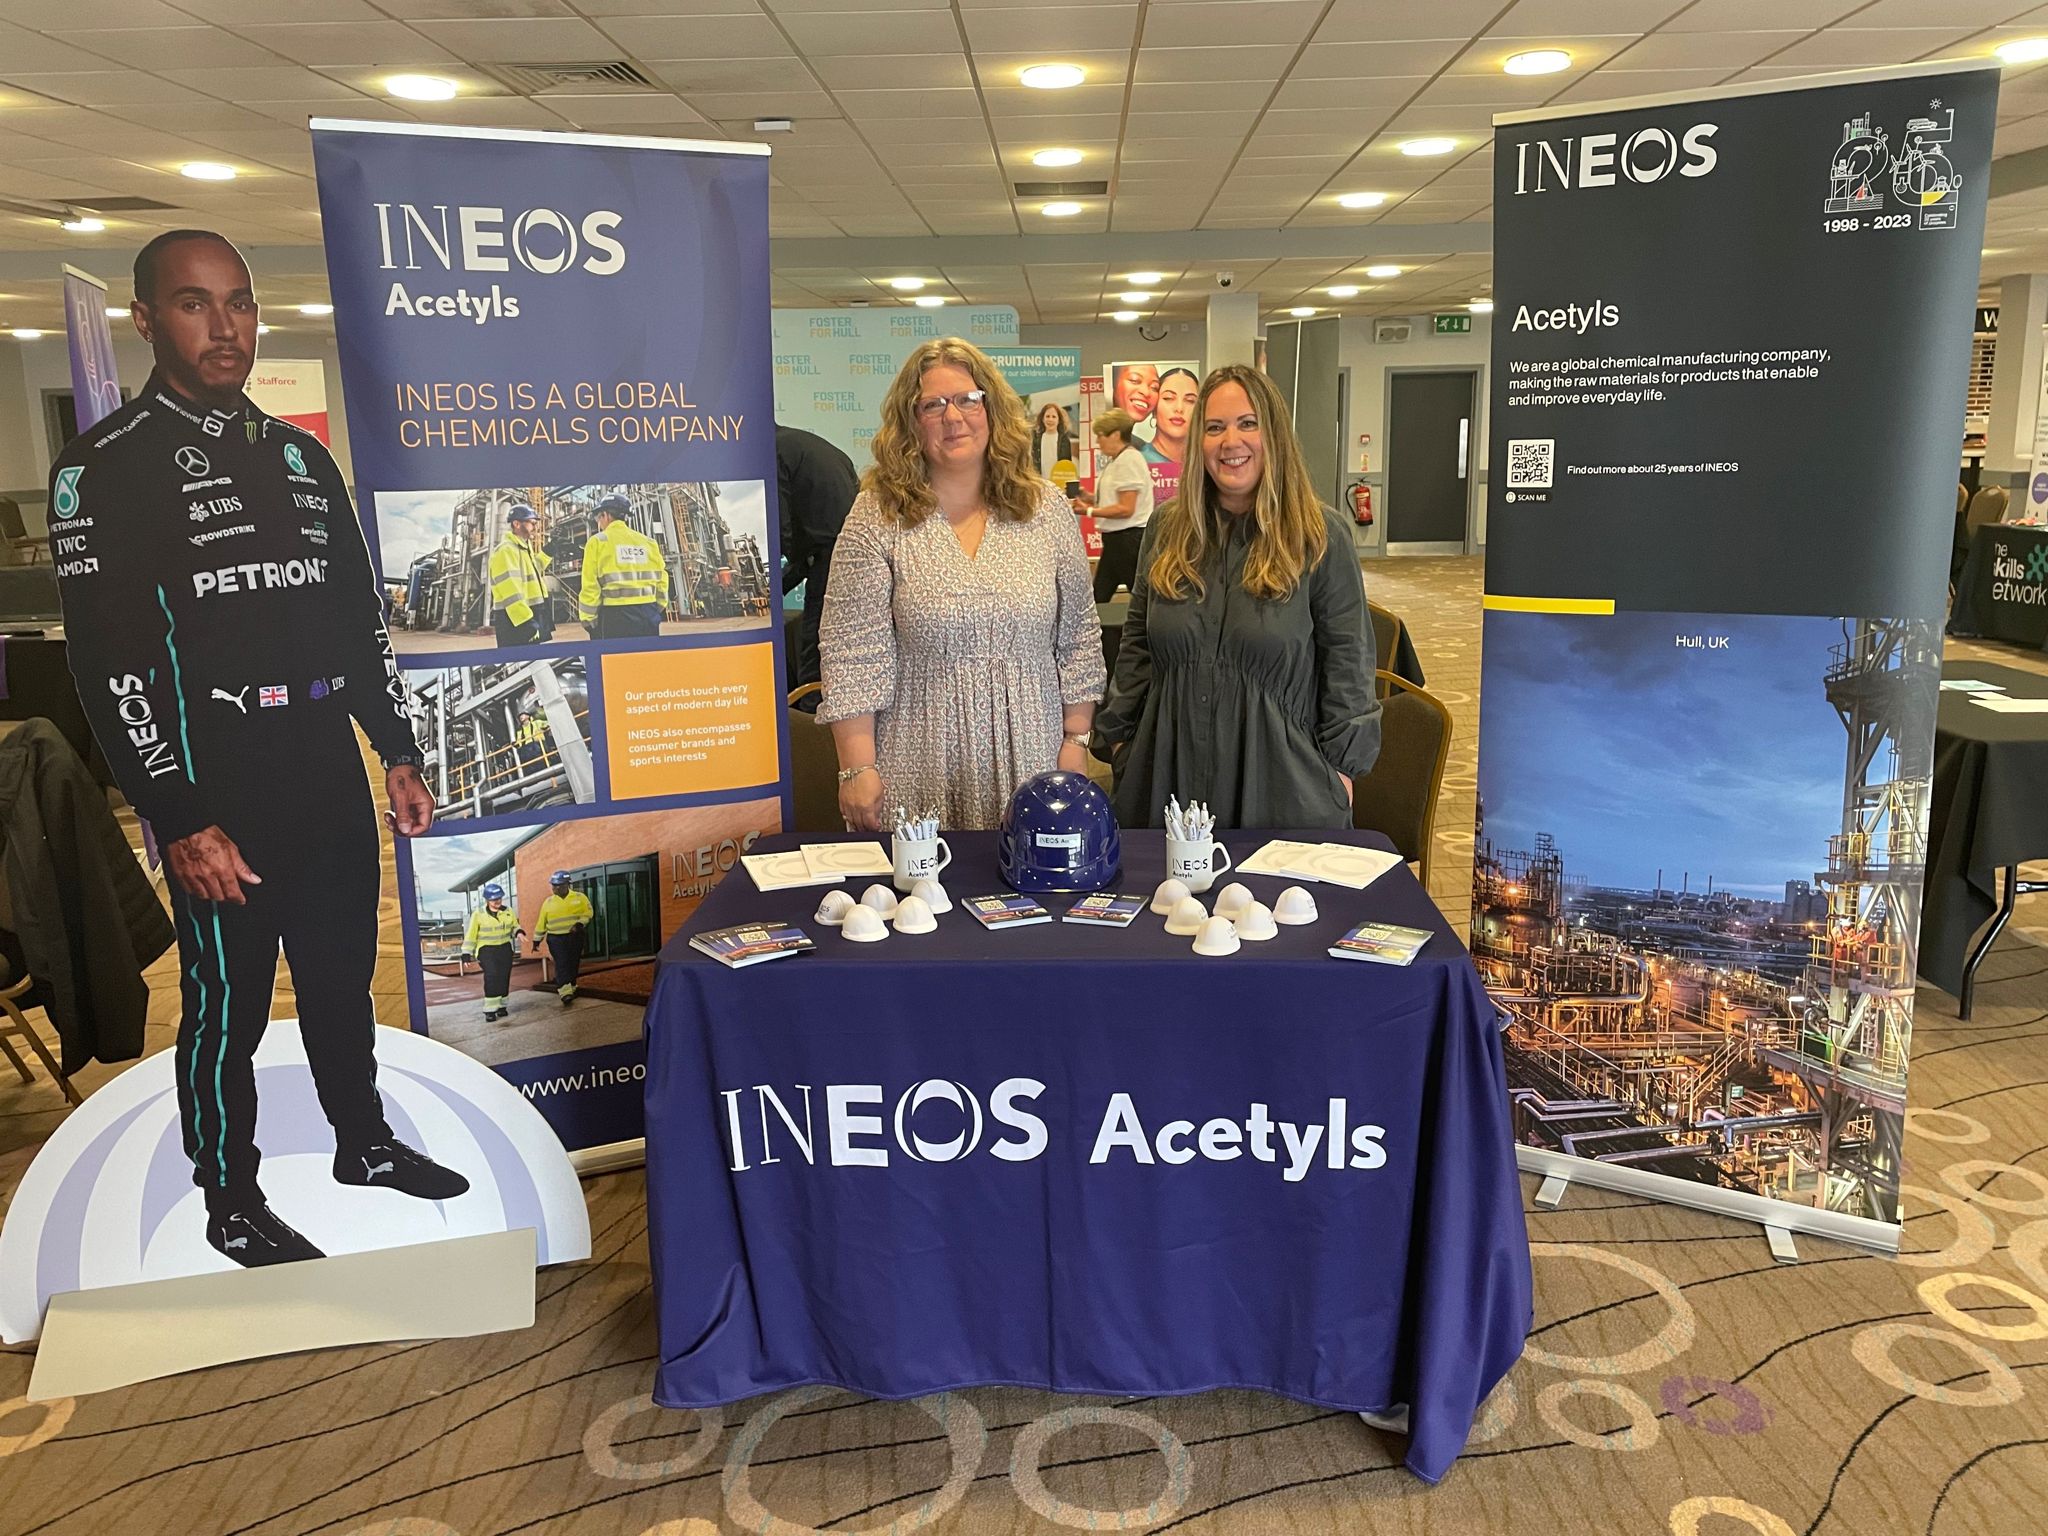 Ineos at our event in Hull